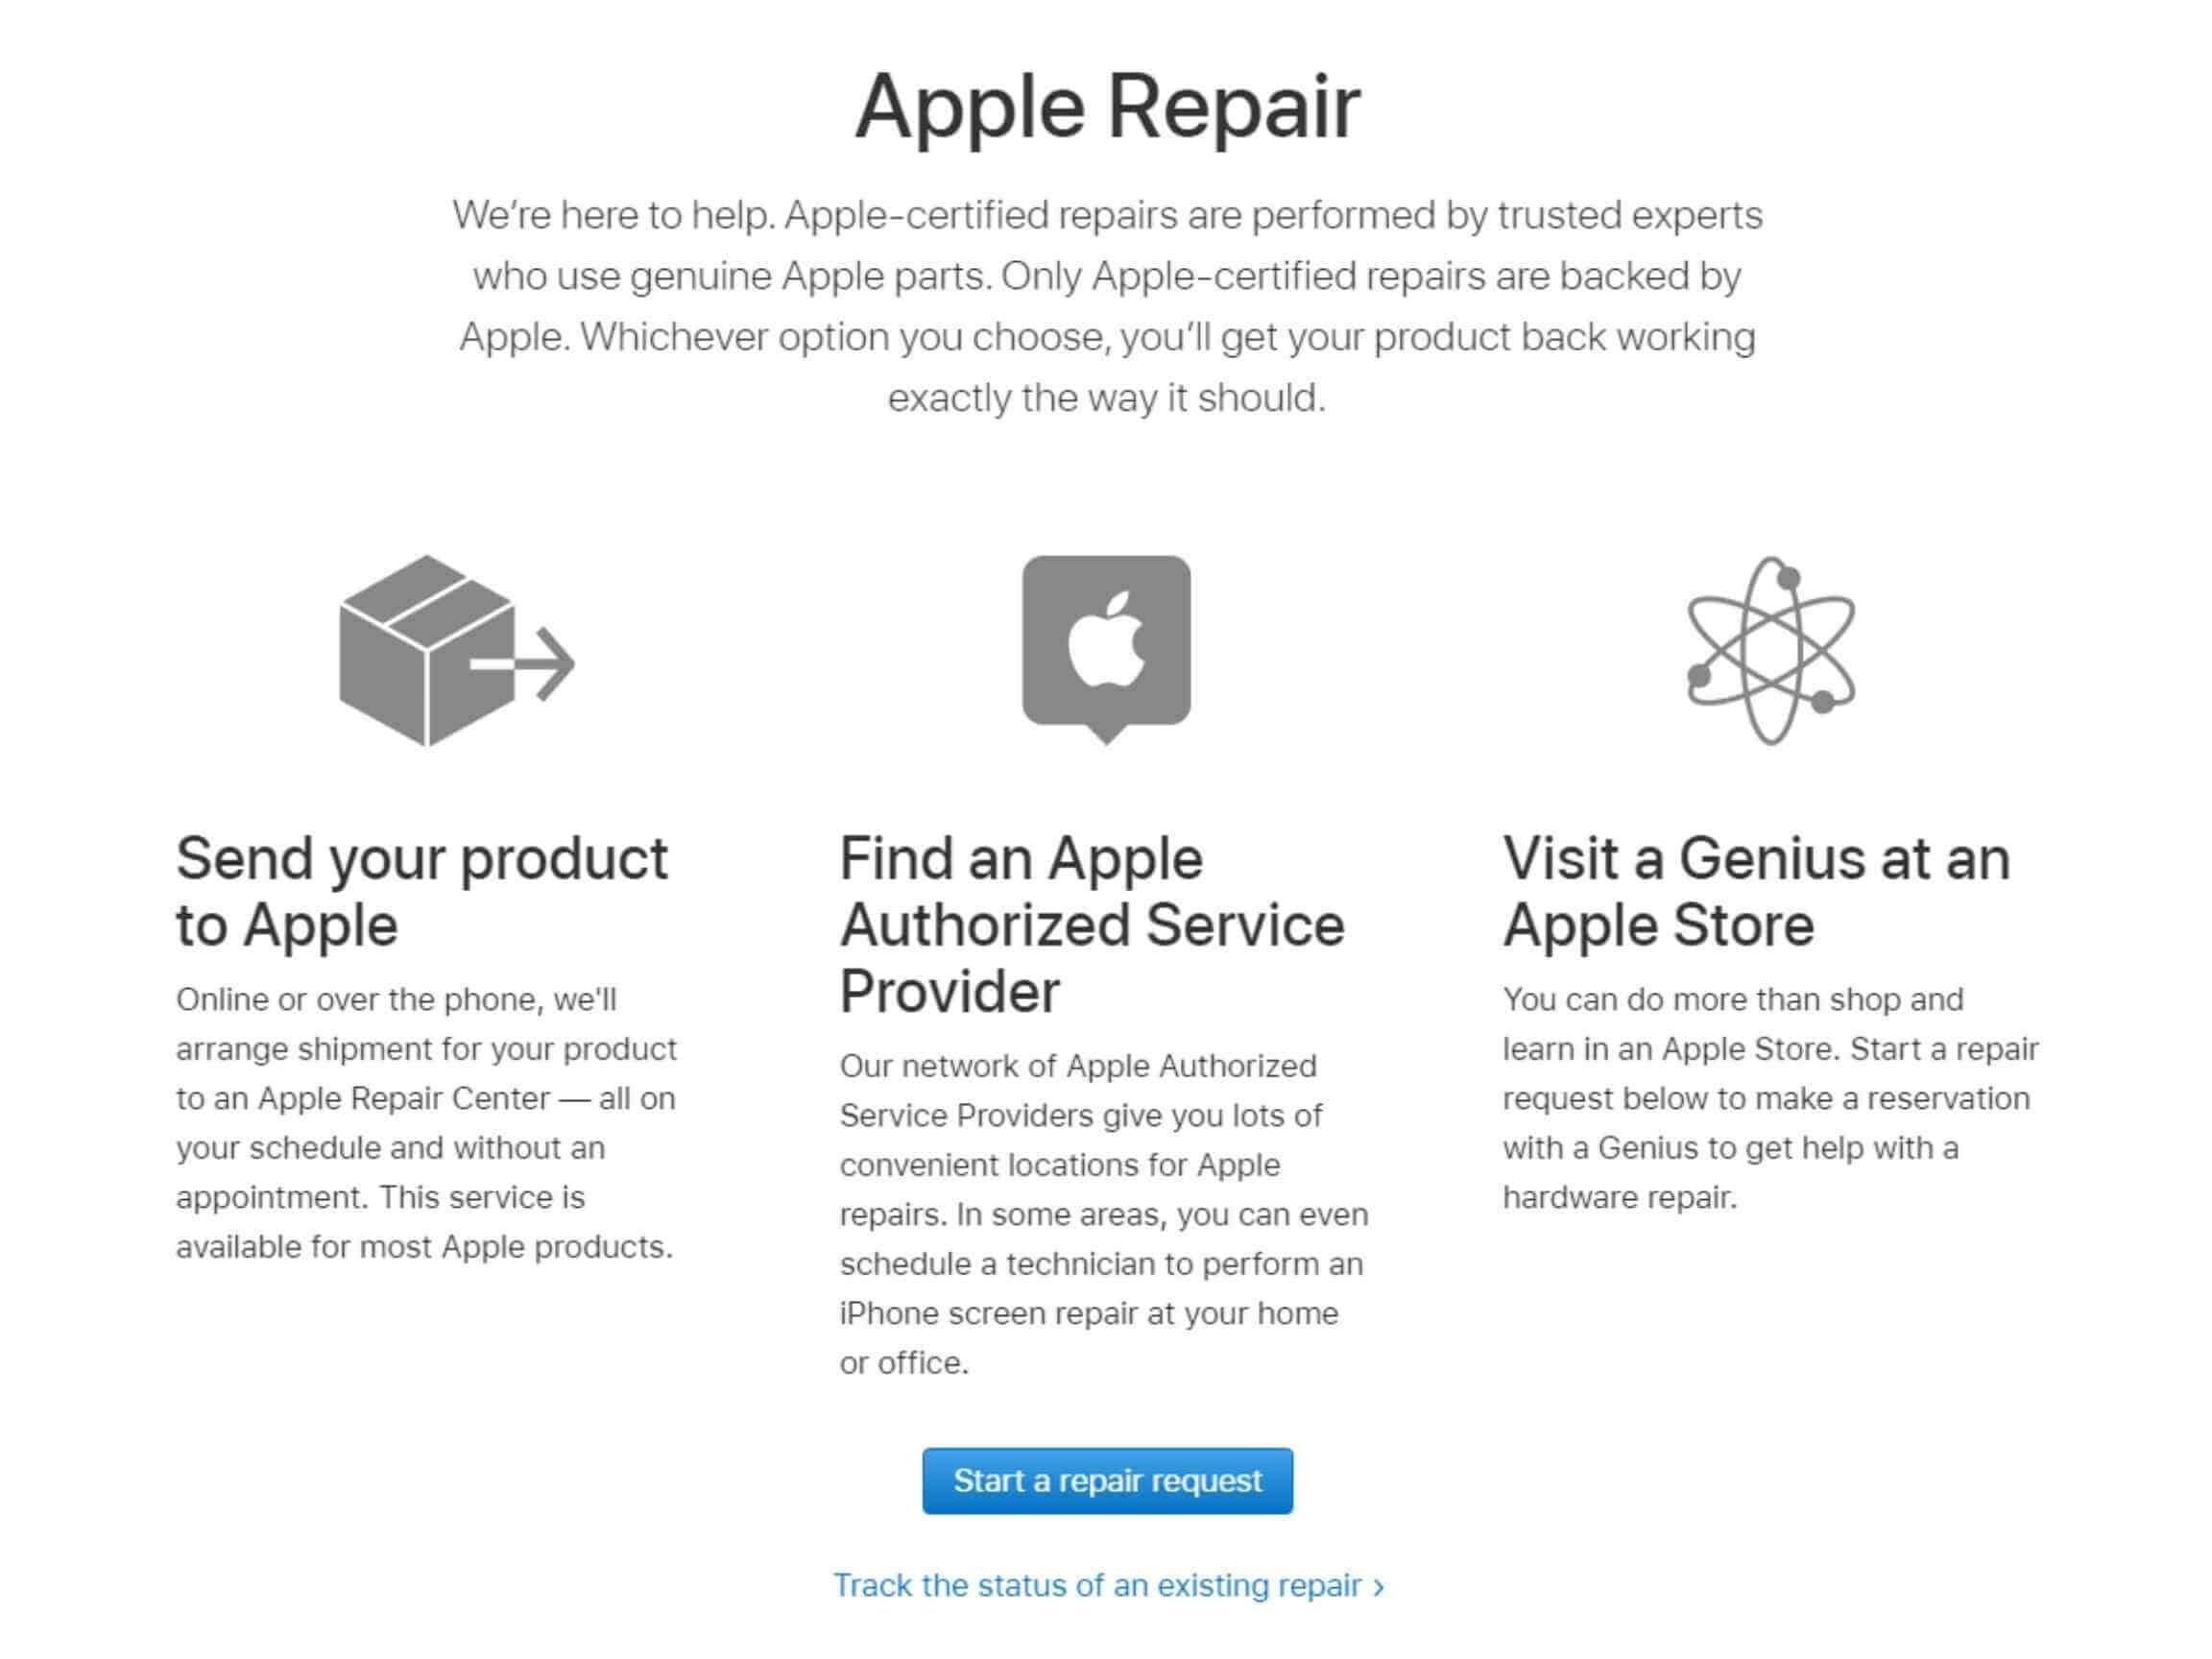 Contact Apple Support For Repair